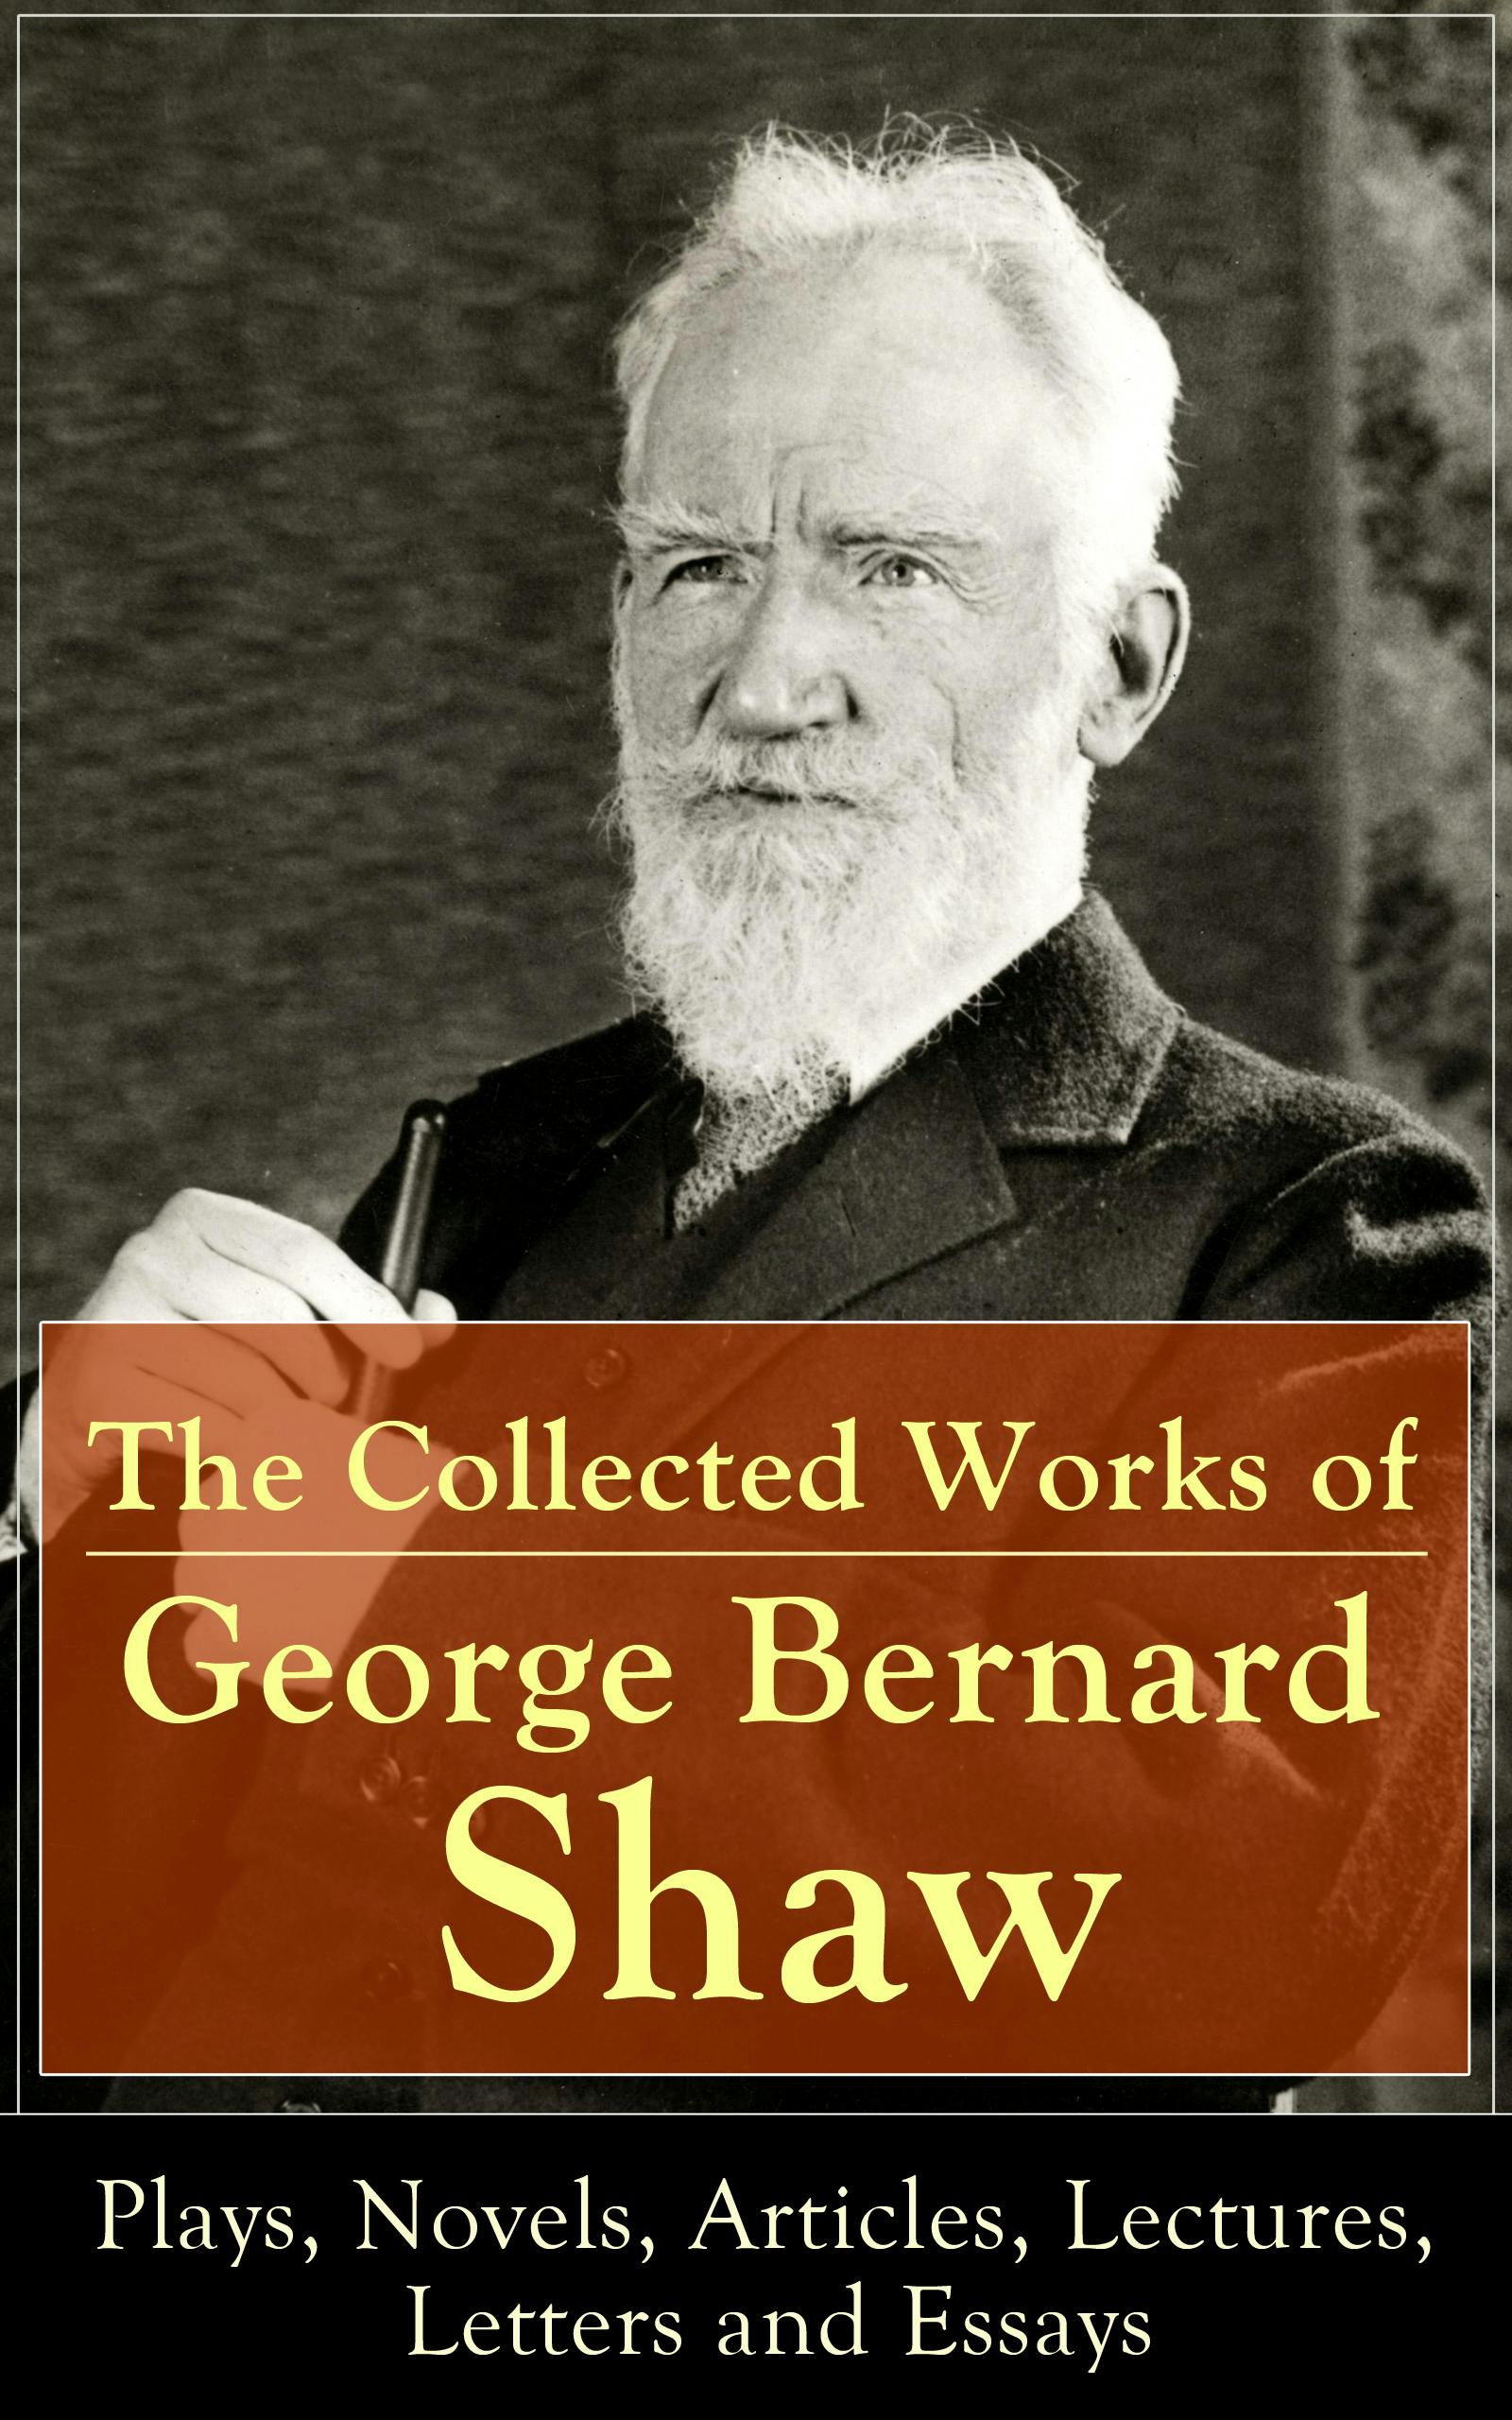 The Collected Works of George Bernard Shaw: Plays, Novels, Articles, Lectures, Letters and Essays: Pygmalion, Mrs. Warren's Profession, Candida,  Arms and The Man, Man and Superman, Caesar and Cleopatra, Androcles And The Lion, The New York Times Articles on War, Memories of Oscar Wilde and more - George Bernard Shaw